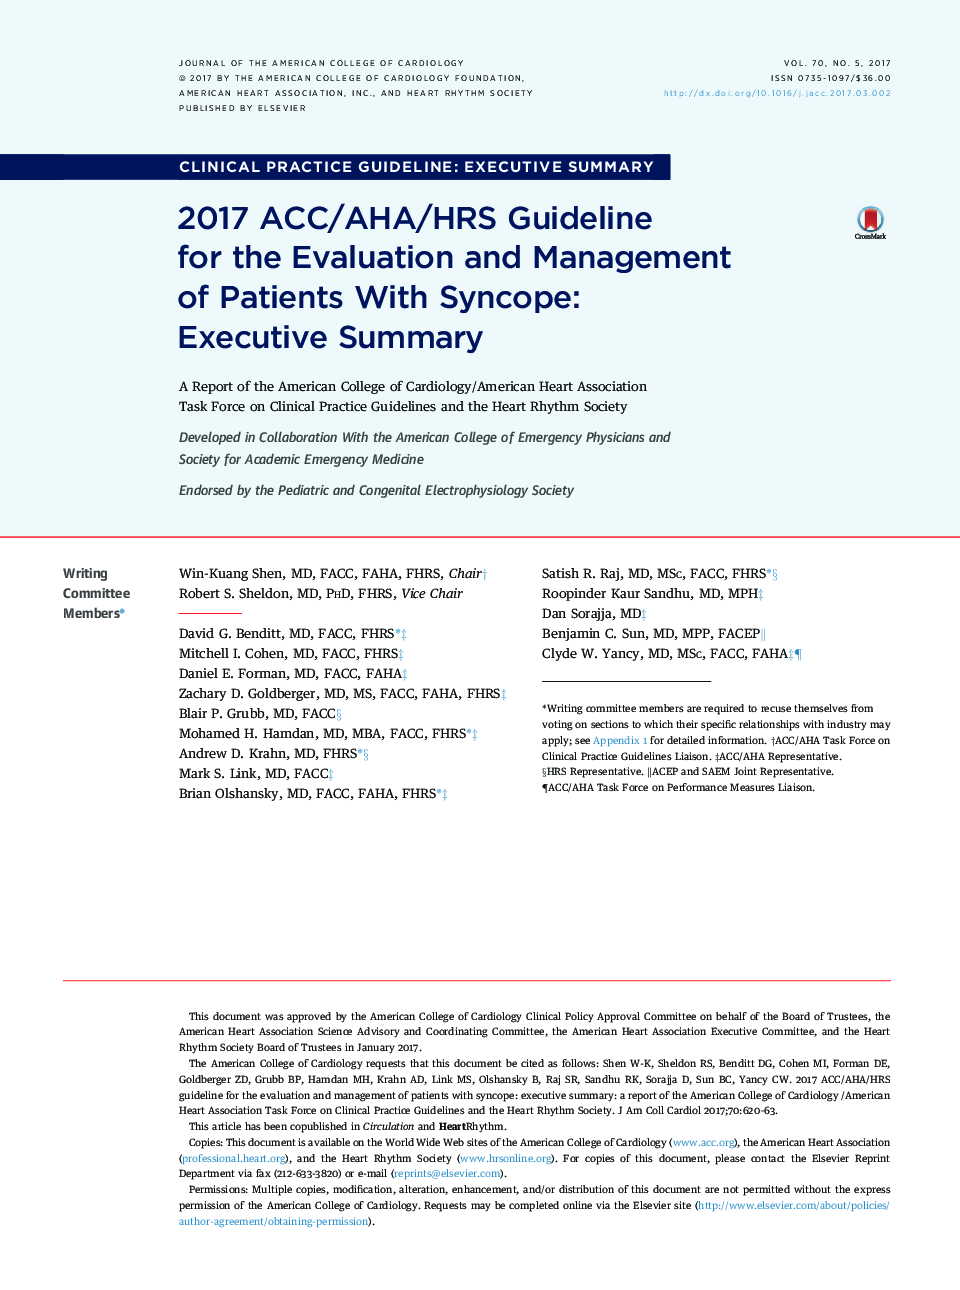 2017 ACC/AHA/HRS Guideline forÂ theÂ Evaluation and Management ofÂ Patients With Syncope: ExecutiveÂ Summary